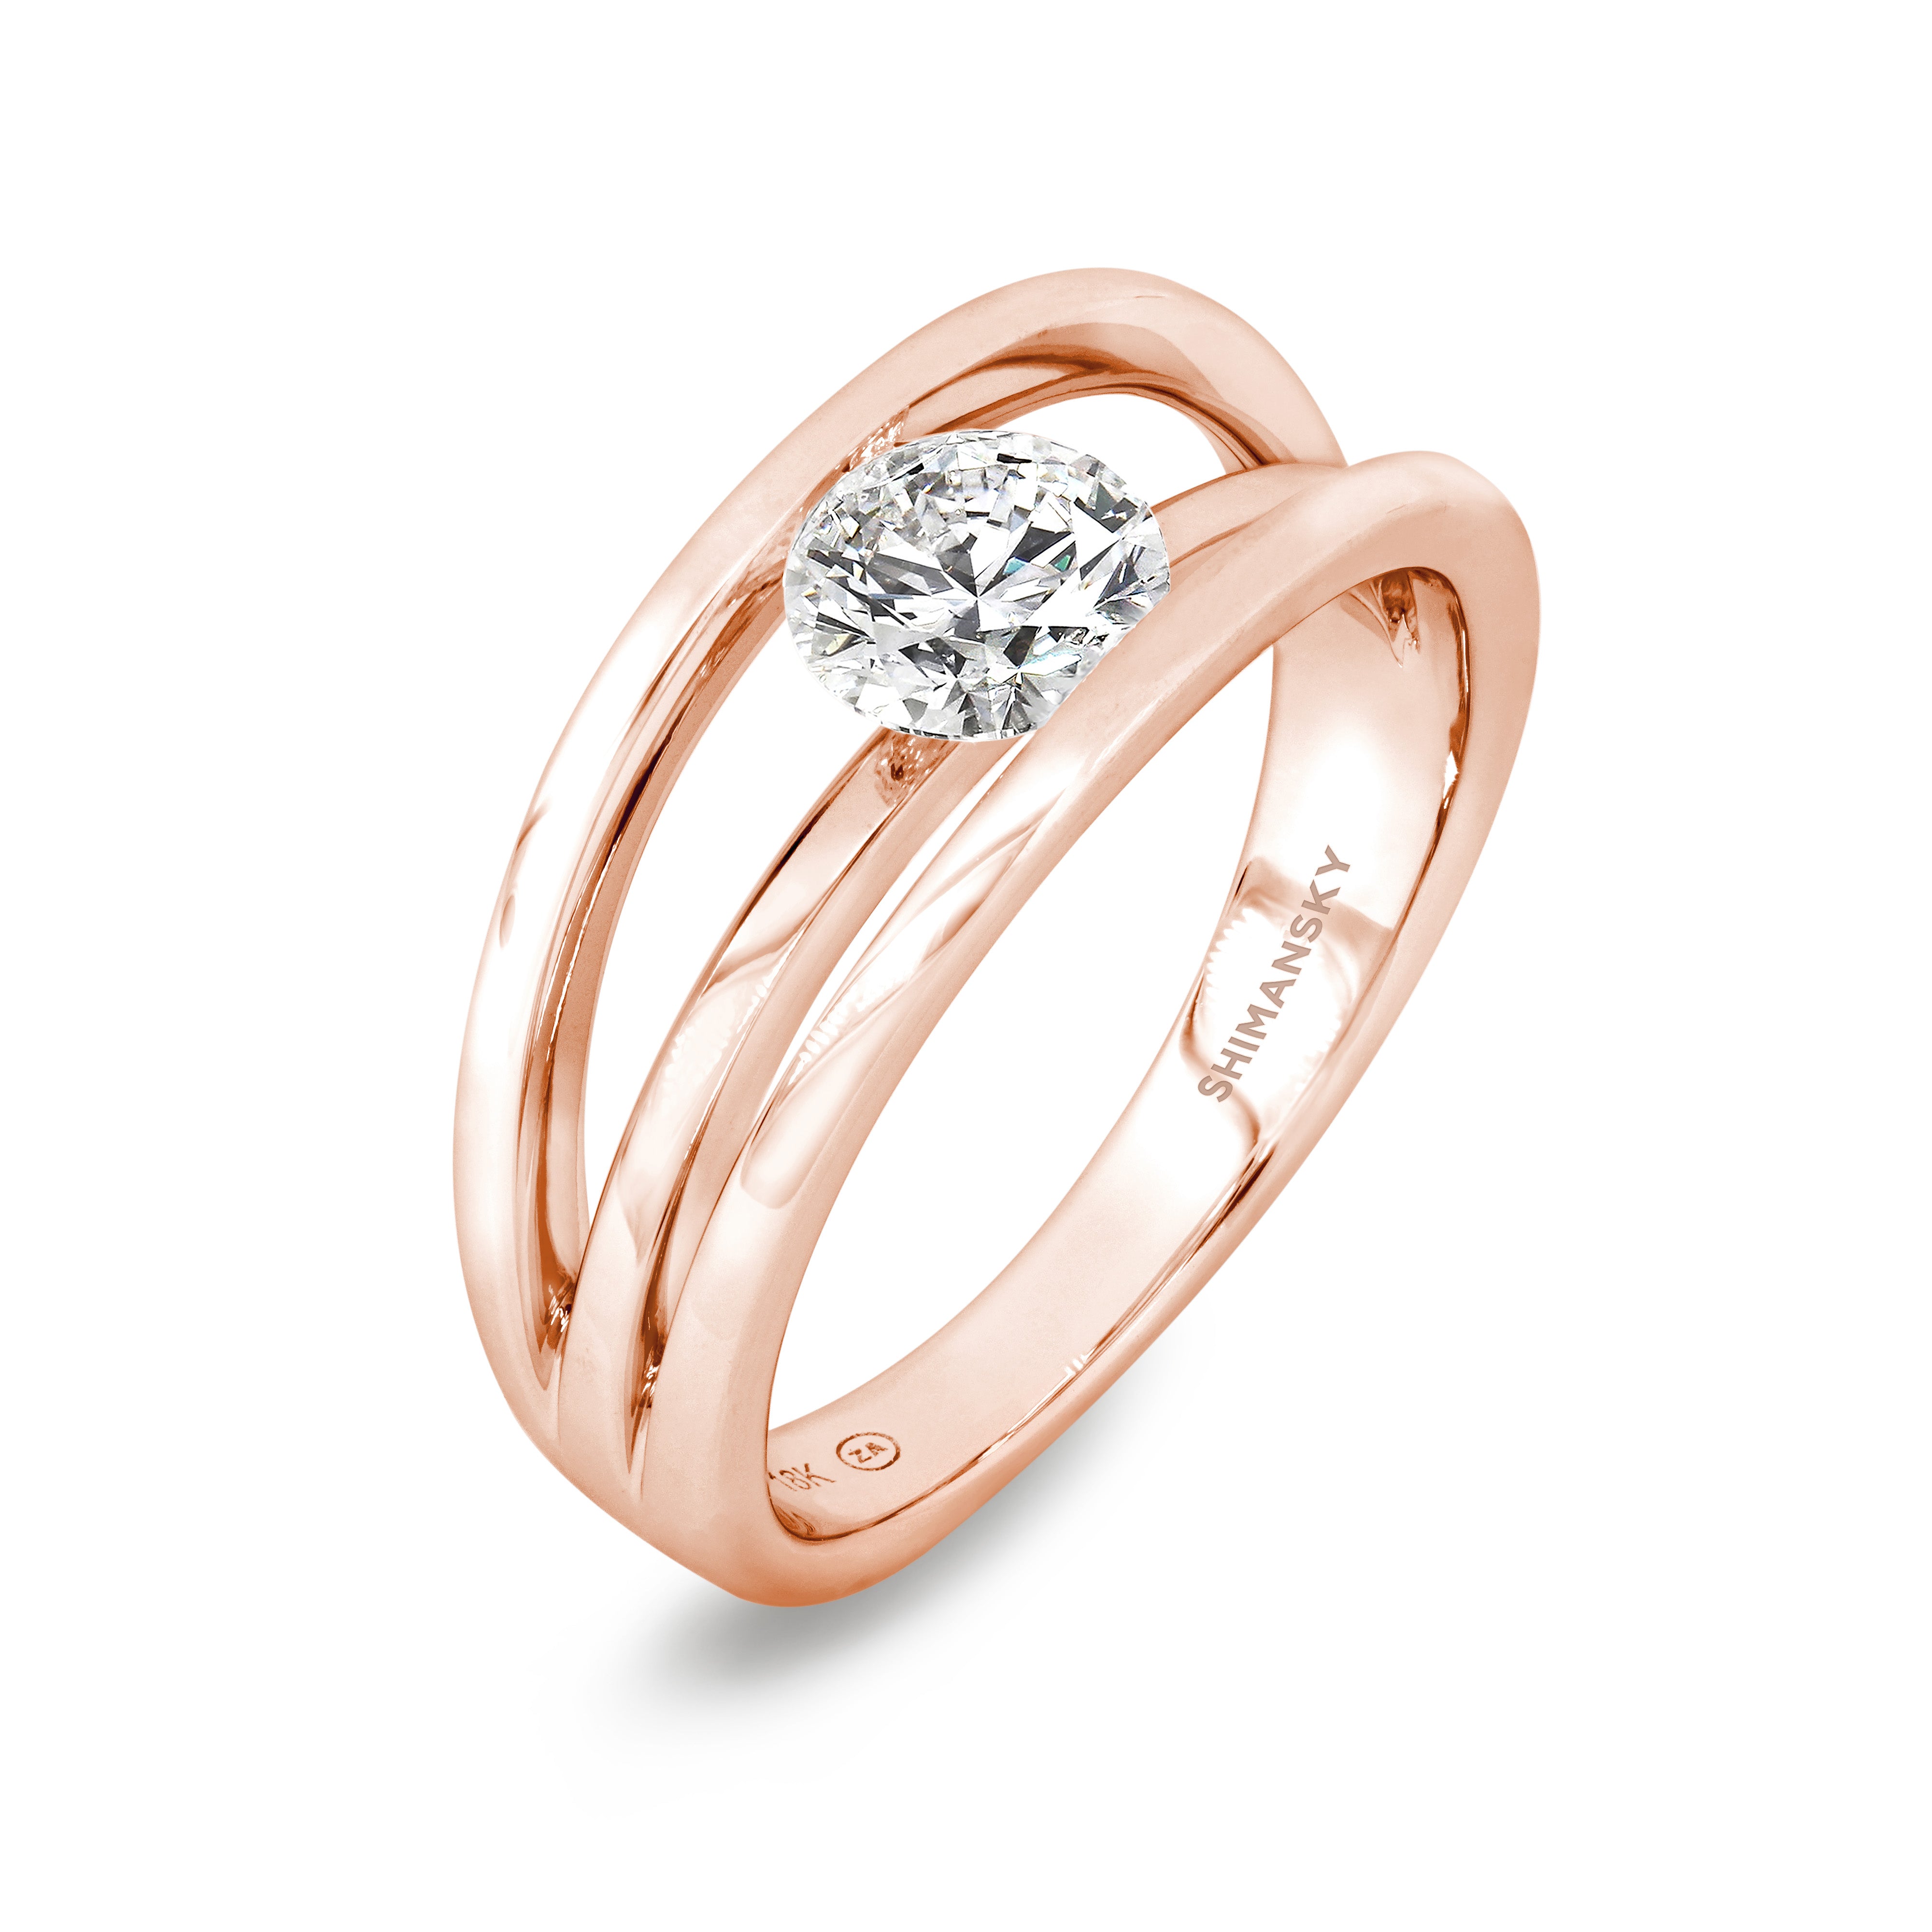 Evolym Diamond Engagement Ring 0.70 Carat in 18K Rose Gold 3D View